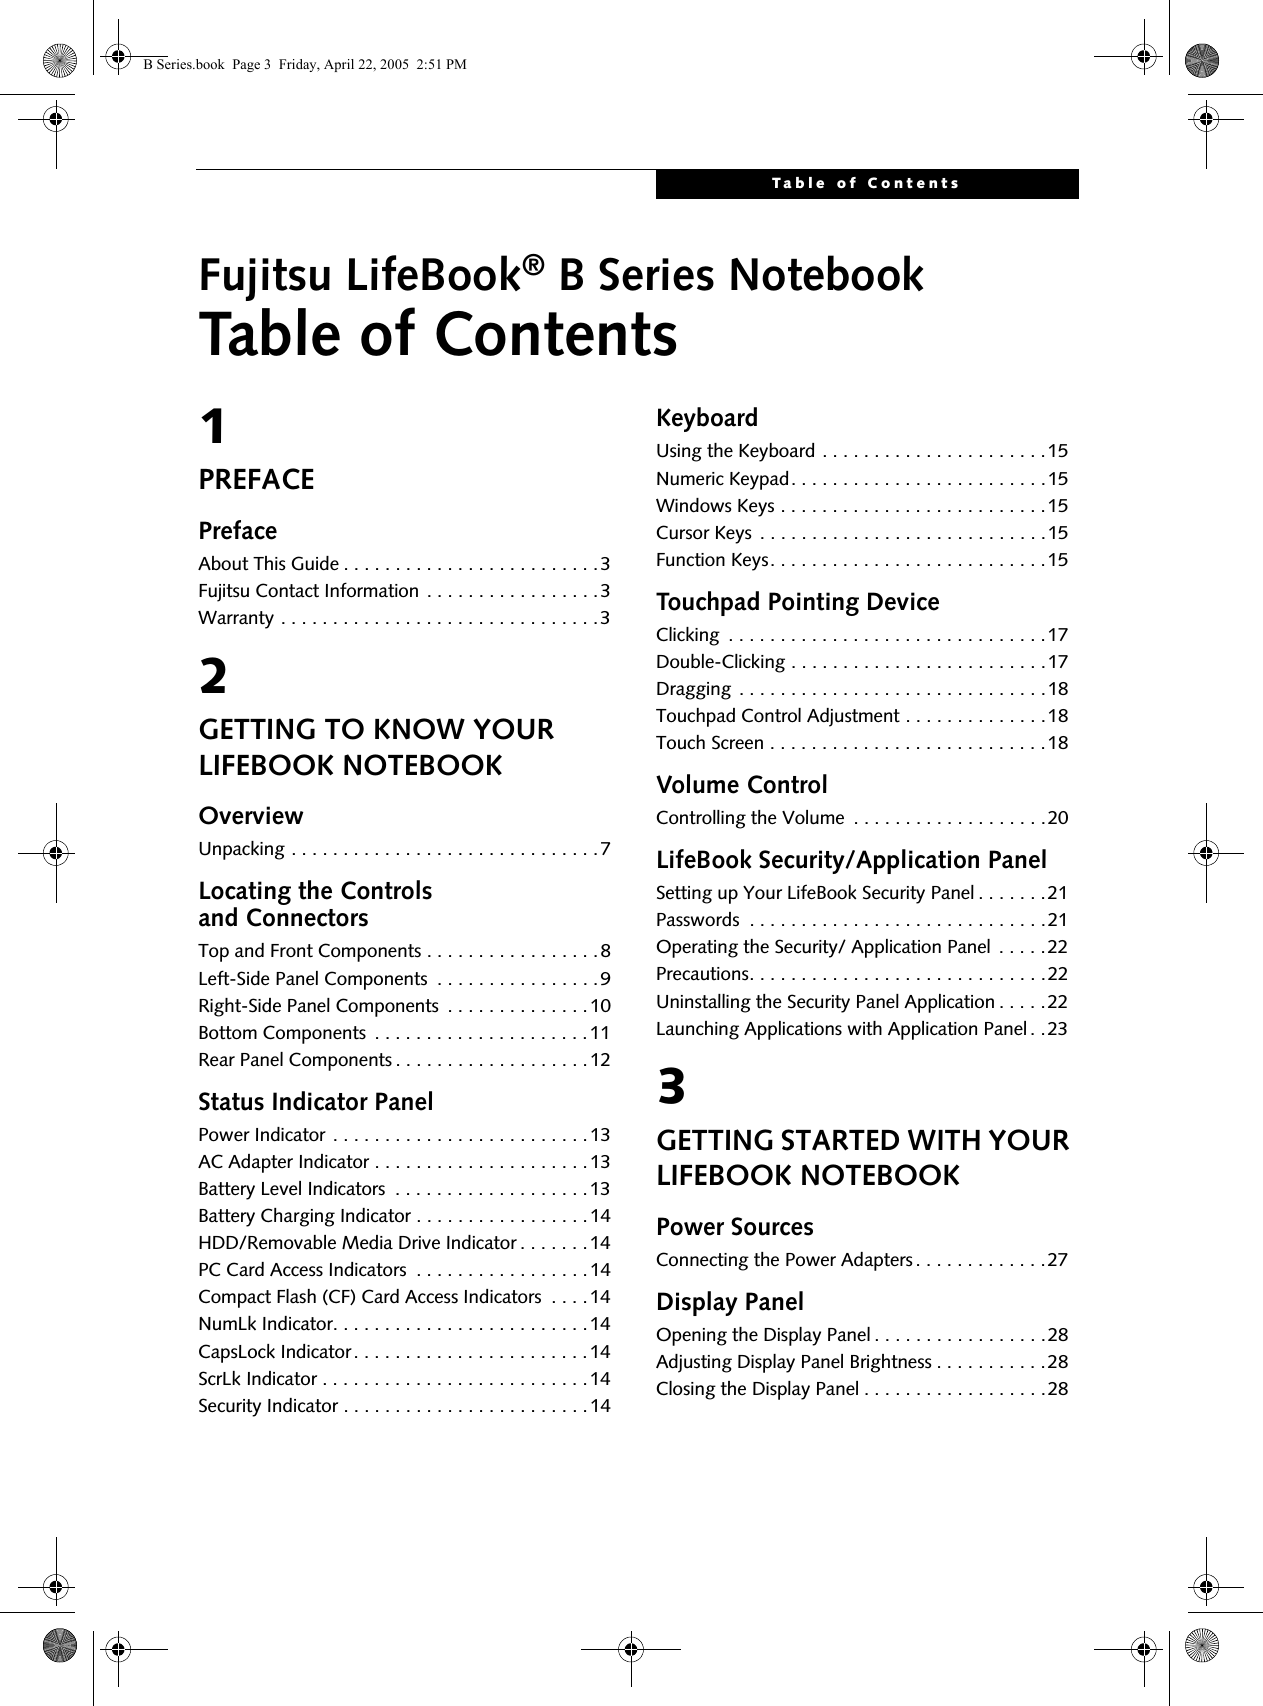 Table of ContentsFujitsu LifeBook® B Series NotebookTable of Contents1PREFACEPrefaceAbout This Guide . . . . . . . . . . . . . . . . . . . . . . . . .3Fujitsu Contact Information . . . . . . . . . . . . . . . . .3Warranty . . . . . . . . . . . . . . . . . . . . . . . . . . . . . . .32GETTING TO KNOW YOUR LIFEBOOK NOTEBOOKOverviewUnpacking . . . . . . . . . . . . . . . . . . . . . . . . . . . . . .7Locating the Controlsand ConnectorsTop and Front Components . . . . . . . . . . . . . . . . .8Left-Side Panel Components  . . . . . . . . . . . . . . . .9Right-Side Panel Components  . . . . . . . . . . . . . .10Bottom Components  . . . . . . . . . . . . . . . . . . . . .11Rear Panel Components . . . . . . . . . . . . . . . . . . .12Status Indicator PanelPower Indicator . . . . . . . . . . . . . . . . . . . . . . . . .13AC Adapter Indicator . . . . . . . . . . . . . . . . . . . . .13Battery Level Indicators  . . . . . . . . . . . . . . . . . . .13Battery Charging Indicator . . . . . . . . . . . . . . . . .14HDD/Removable Media Drive Indicator . . . . . . .14PC Card Access Indicators  . . . . . . . . . . . . . . . . .14Compact Flash (CF) Card Access Indicators  . . . . 14NumLk Indicator. . . . . . . . . . . . . . . . . . . . . . . . .14CapsLock Indicator. . . . . . . . . . . . . . . . . . . . . . .14ScrLk Indicator . . . . . . . . . . . . . . . . . . . . . . . . . .14Security Indicator . . . . . . . . . . . . . . . . . . . . . . . .14KeyboardUsing the Keyboard . . . . . . . . . . . . . . . . . . . . . .15Numeric Keypad. . . . . . . . . . . . . . . . . . . . . . . . .15Windows Keys . . . . . . . . . . . . . . . . . . . . . . . . . .15Cursor Keys  . . . . . . . . . . . . . . . . . . . . . . . . . . . .15Function Keys. . . . . . . . . . . . . . . . . . . . . . . . . . .15Touchpad Pointing DeviceClicking  . . . . . . . . . . . . . . . . . . . . . . . . . . . . . . .17Double-Clicking . . . . . . . . . . . . . . . . . . . . . . . . .17Dragging  . . . . . . . . . . . . . . . . . . . . . . . . . . . . . .18Touchpad Control Adjustment . . . . . . . . . . . . . .18Touch Screen . . . . . . . . . . . . . . . . . . . . . . . . . . .18Volume ControlControlling the Volume  . . . . . . . . . . . . . . . . . . .20LifeBook Security/Application PanelSetting up Your LifeBook Security Panel . . . . . . .21Passwords  . . . . . . . . . . . . . . . . . . . . . . . . . . . . .21Operating the Security/ Application Panel  . . . . .22Precautions. . . . . . . . . . . . . . . . . . . . . . . . . . . . .22Uninstalling the Security Panel Application . . . . .22Launching Applications with Application Panel . .233GETTING STARTED WITH YOUR LIFEBOOK NOTEBOOKPower SourcesConnecting the Power Adapters . . . . . . . . . . . . .27Display PanelOpening the Display Panel . . . . . . . . . . . . . . . . .28Adjusting Display Panel Brightness . . . . . . . . . . .28Closing the Display Panel . . . . . . . . . . . . . . . . . .28 B Series.book  Page 3  Friday, April 22, 2005  2:51 PM